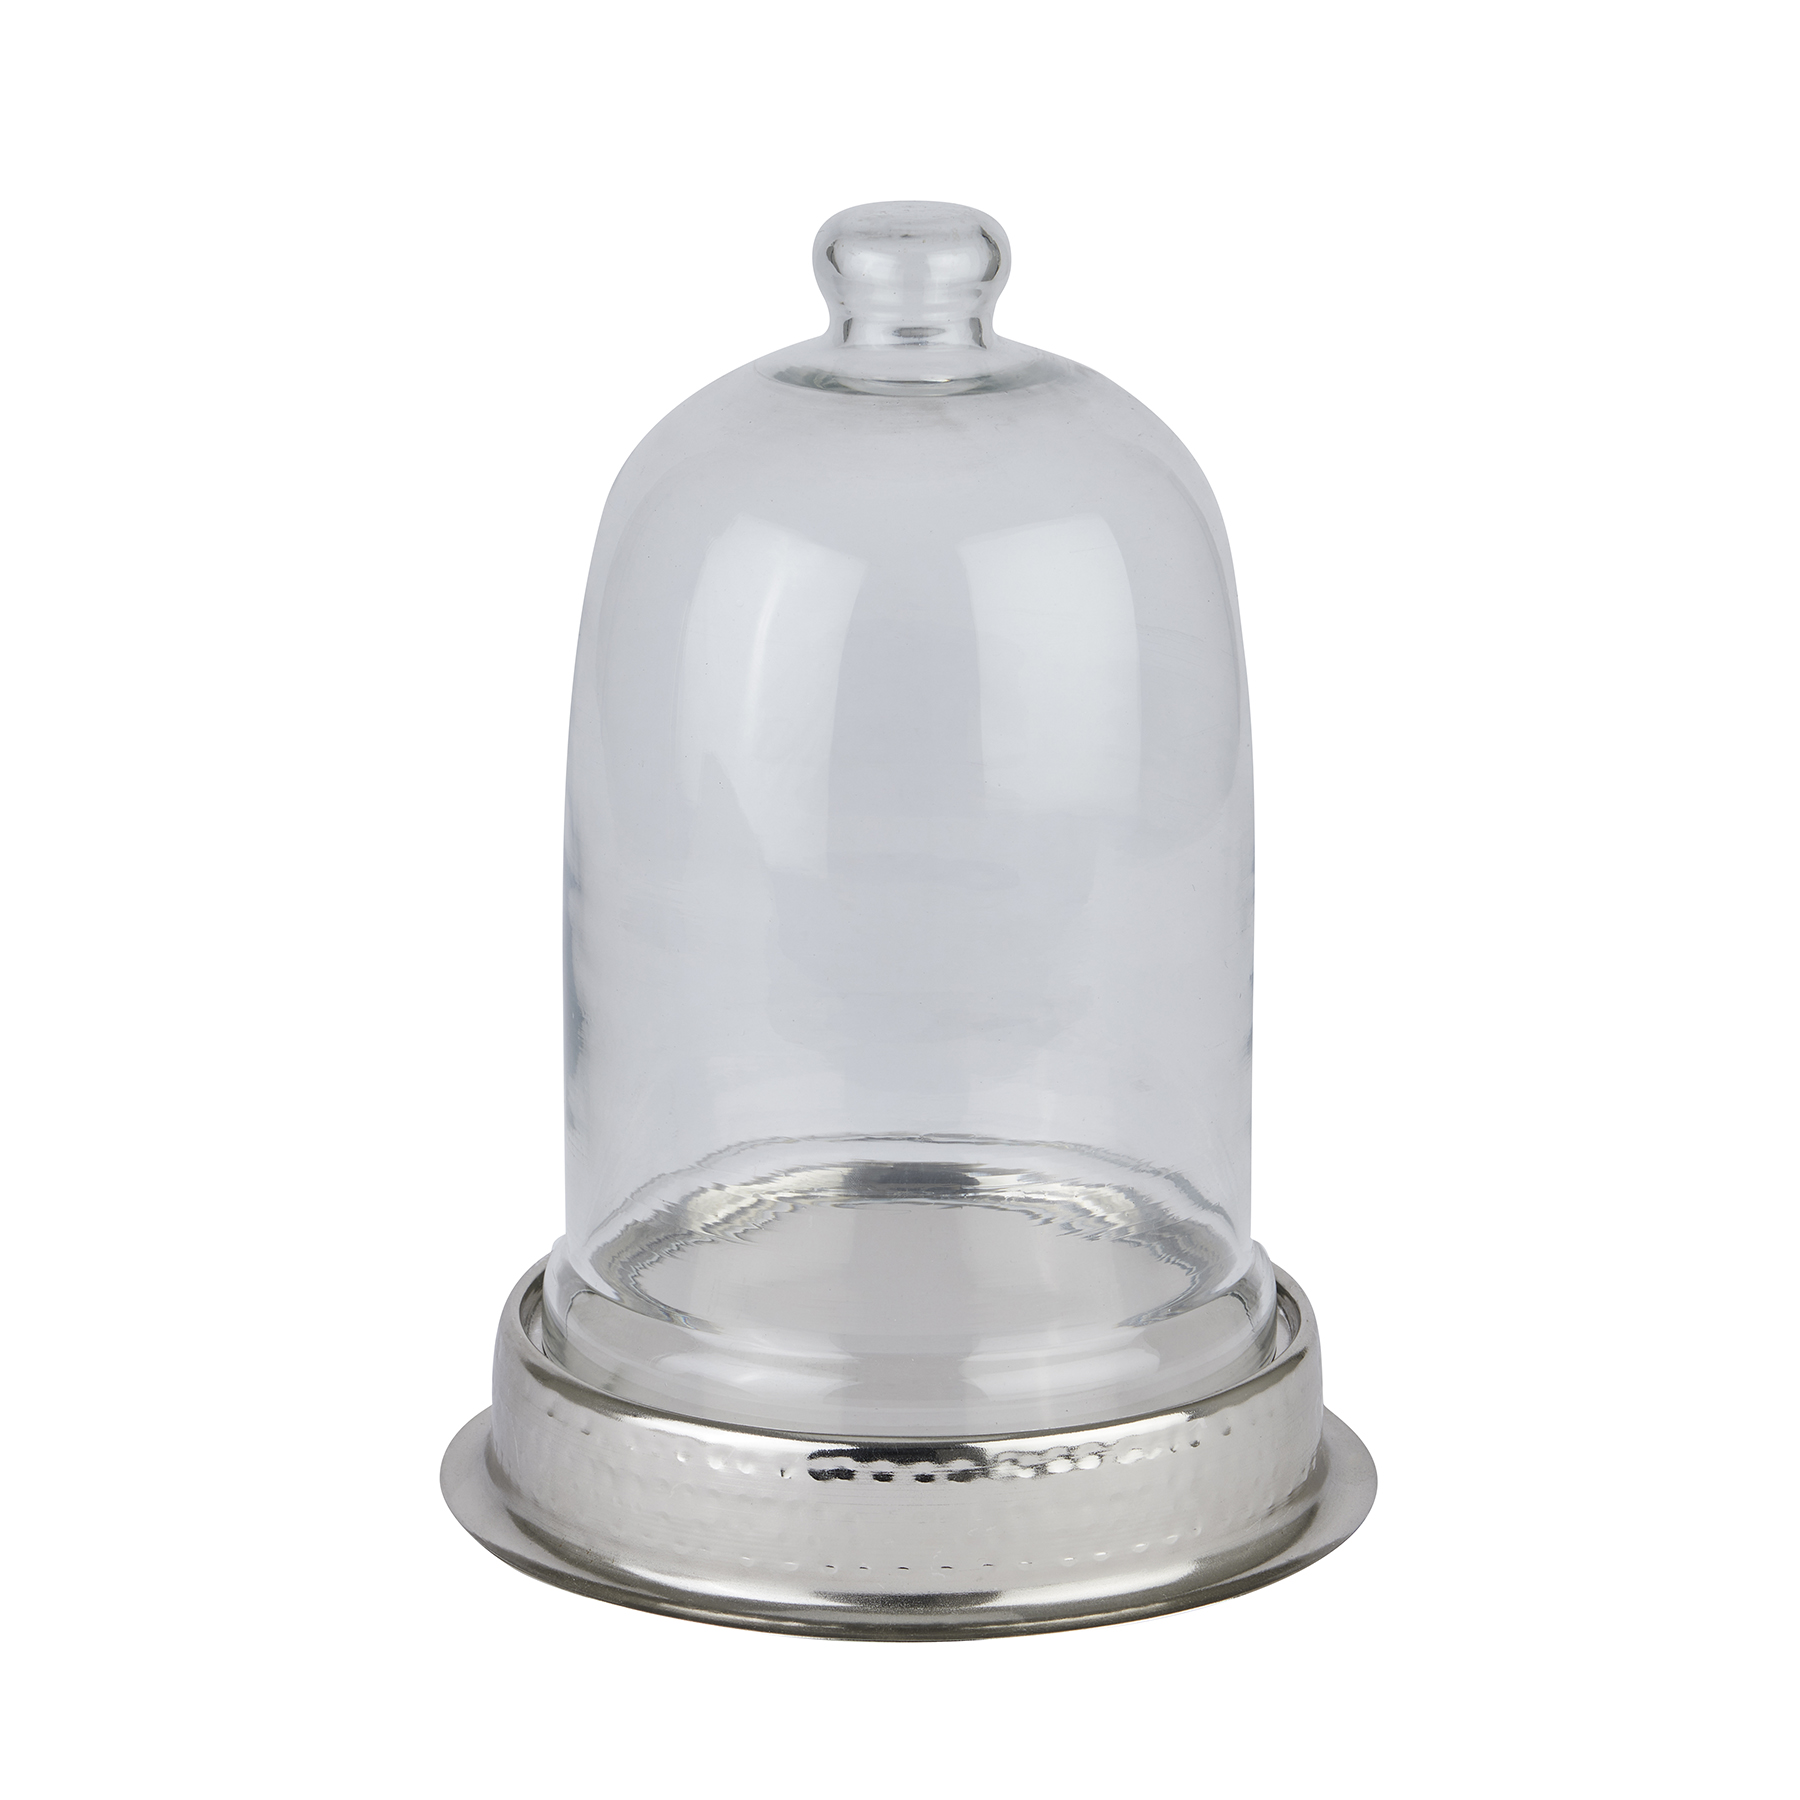 Large Nickel And Glass Cloche - Image 1